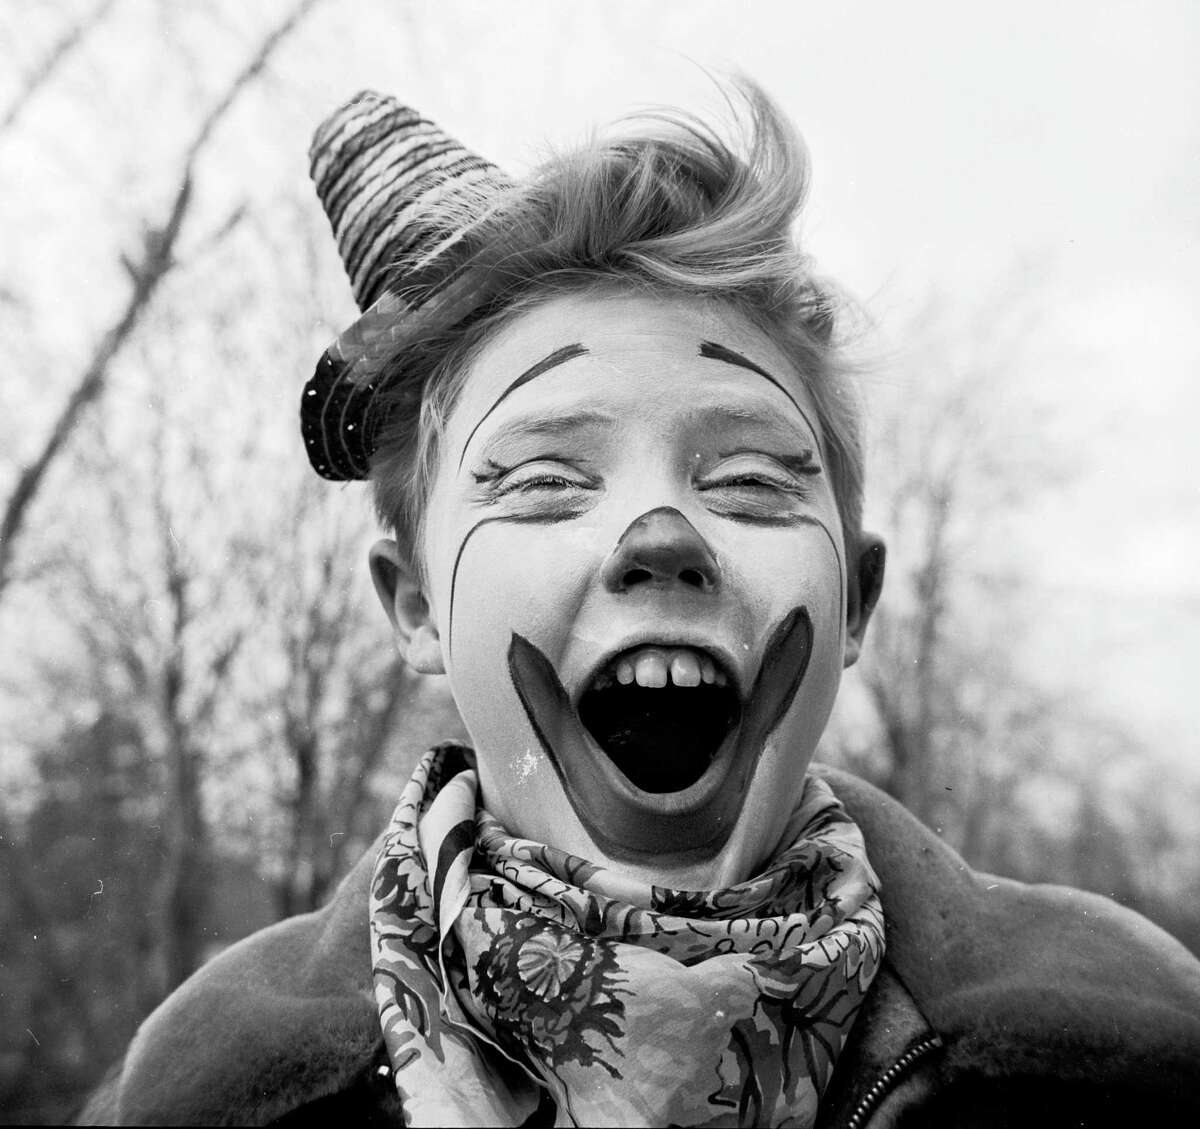 Circa 1955: Young clown Ronnie Walken, later film star Christopher Walken, pulls a face for the camera.